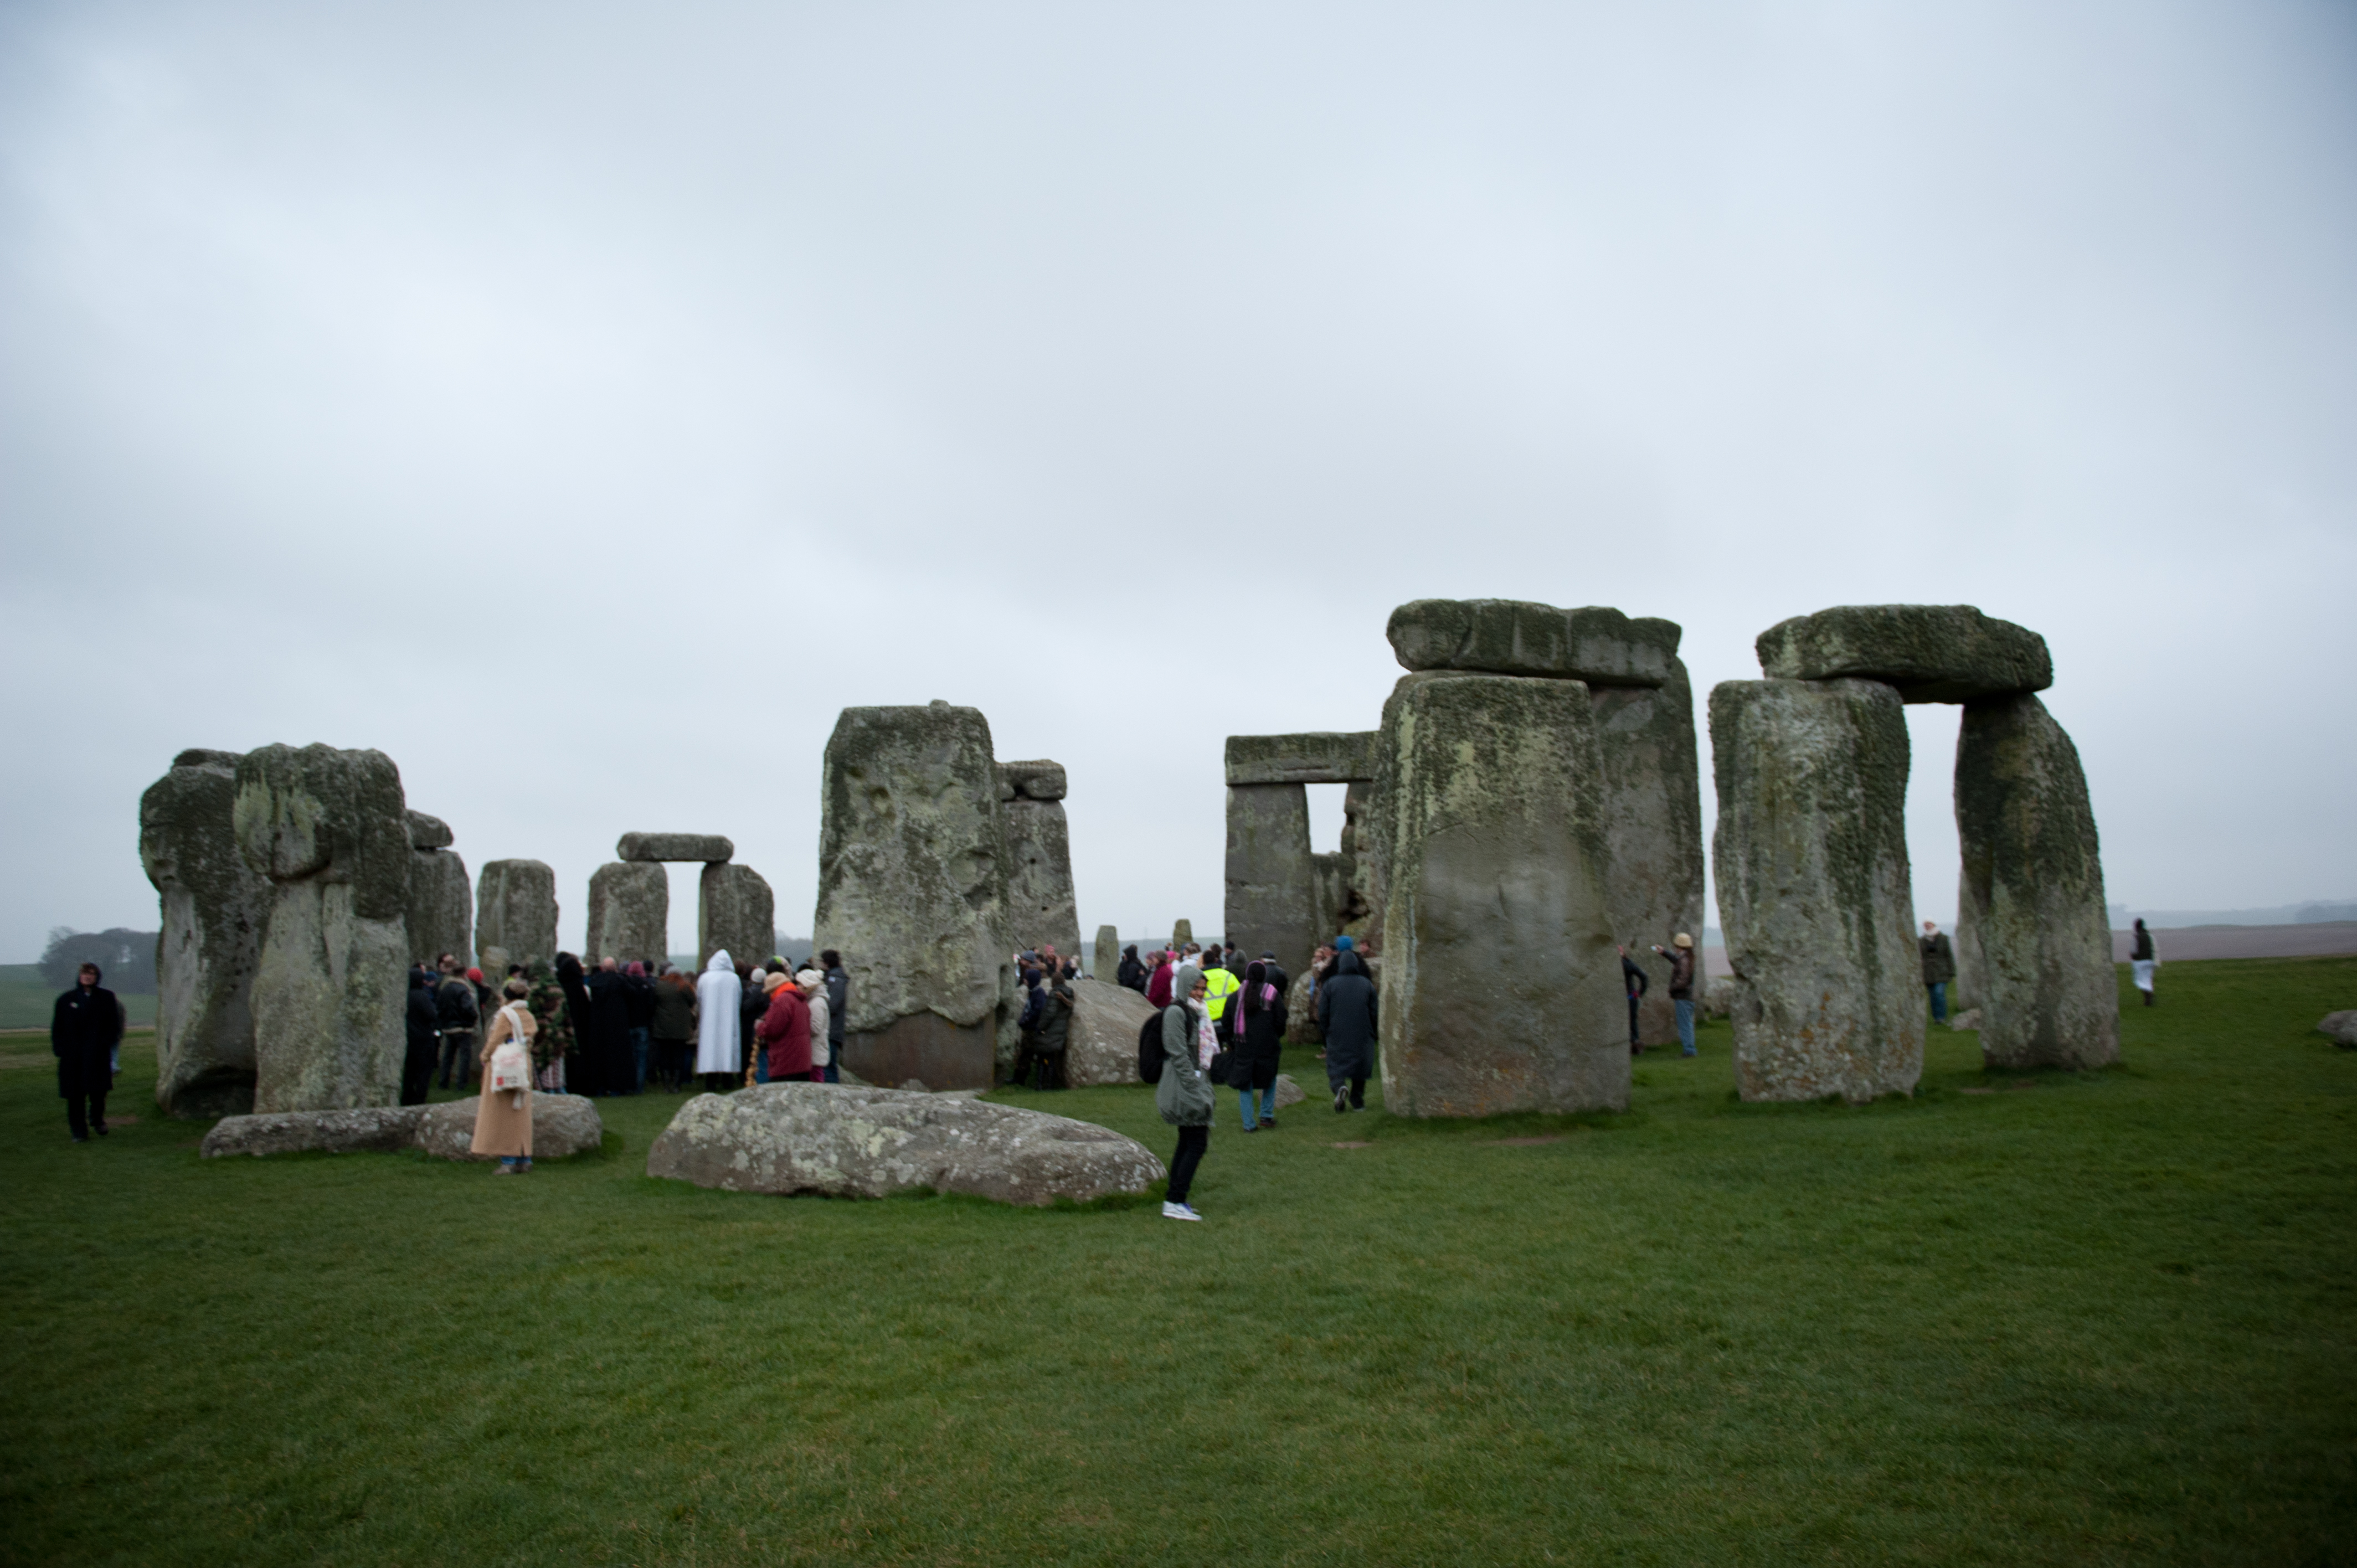 The Mysterious Stonehenge during Summer Equinox